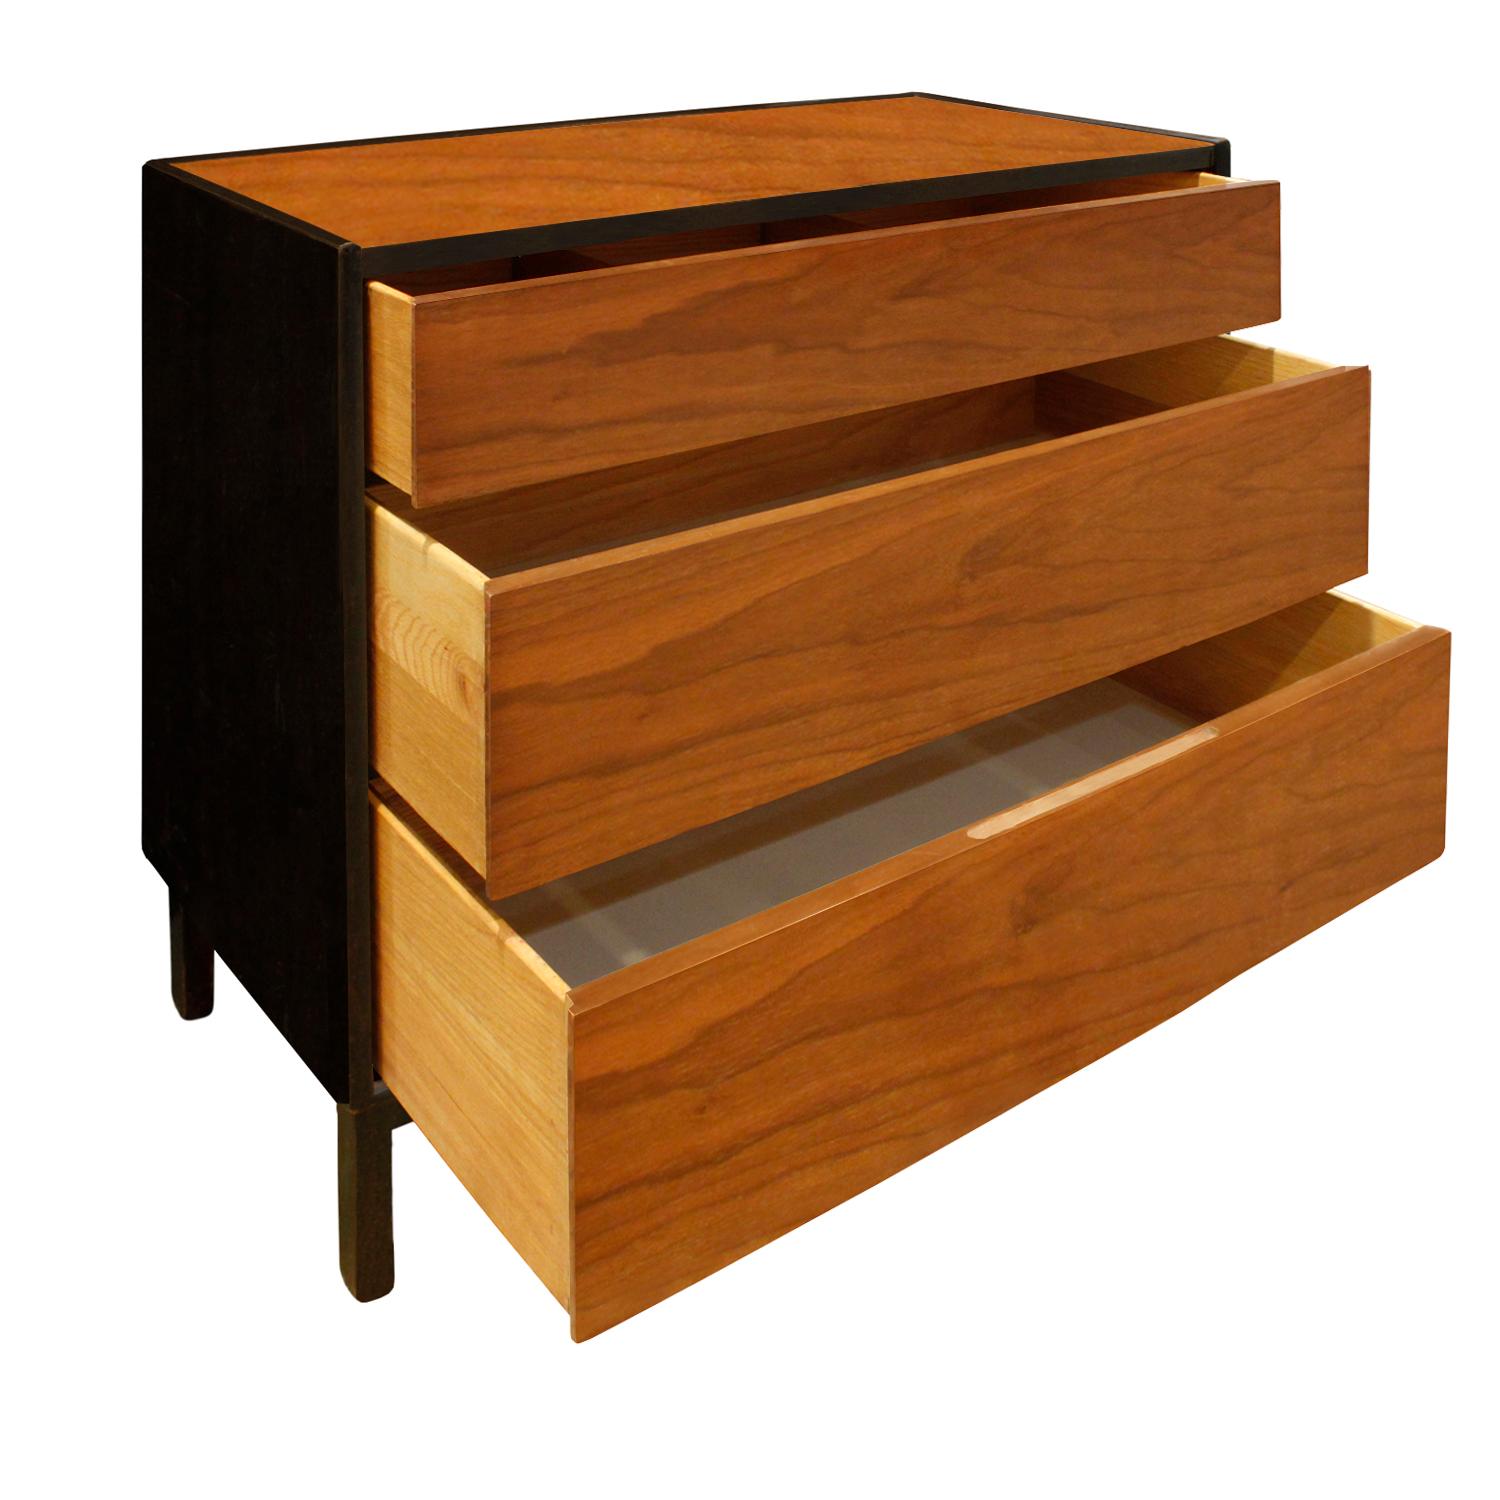 Hand-Crafted Edward Wormley Pair of Bedside Tables/Chests in Teak and Mahogany 1950s ‘Signed’